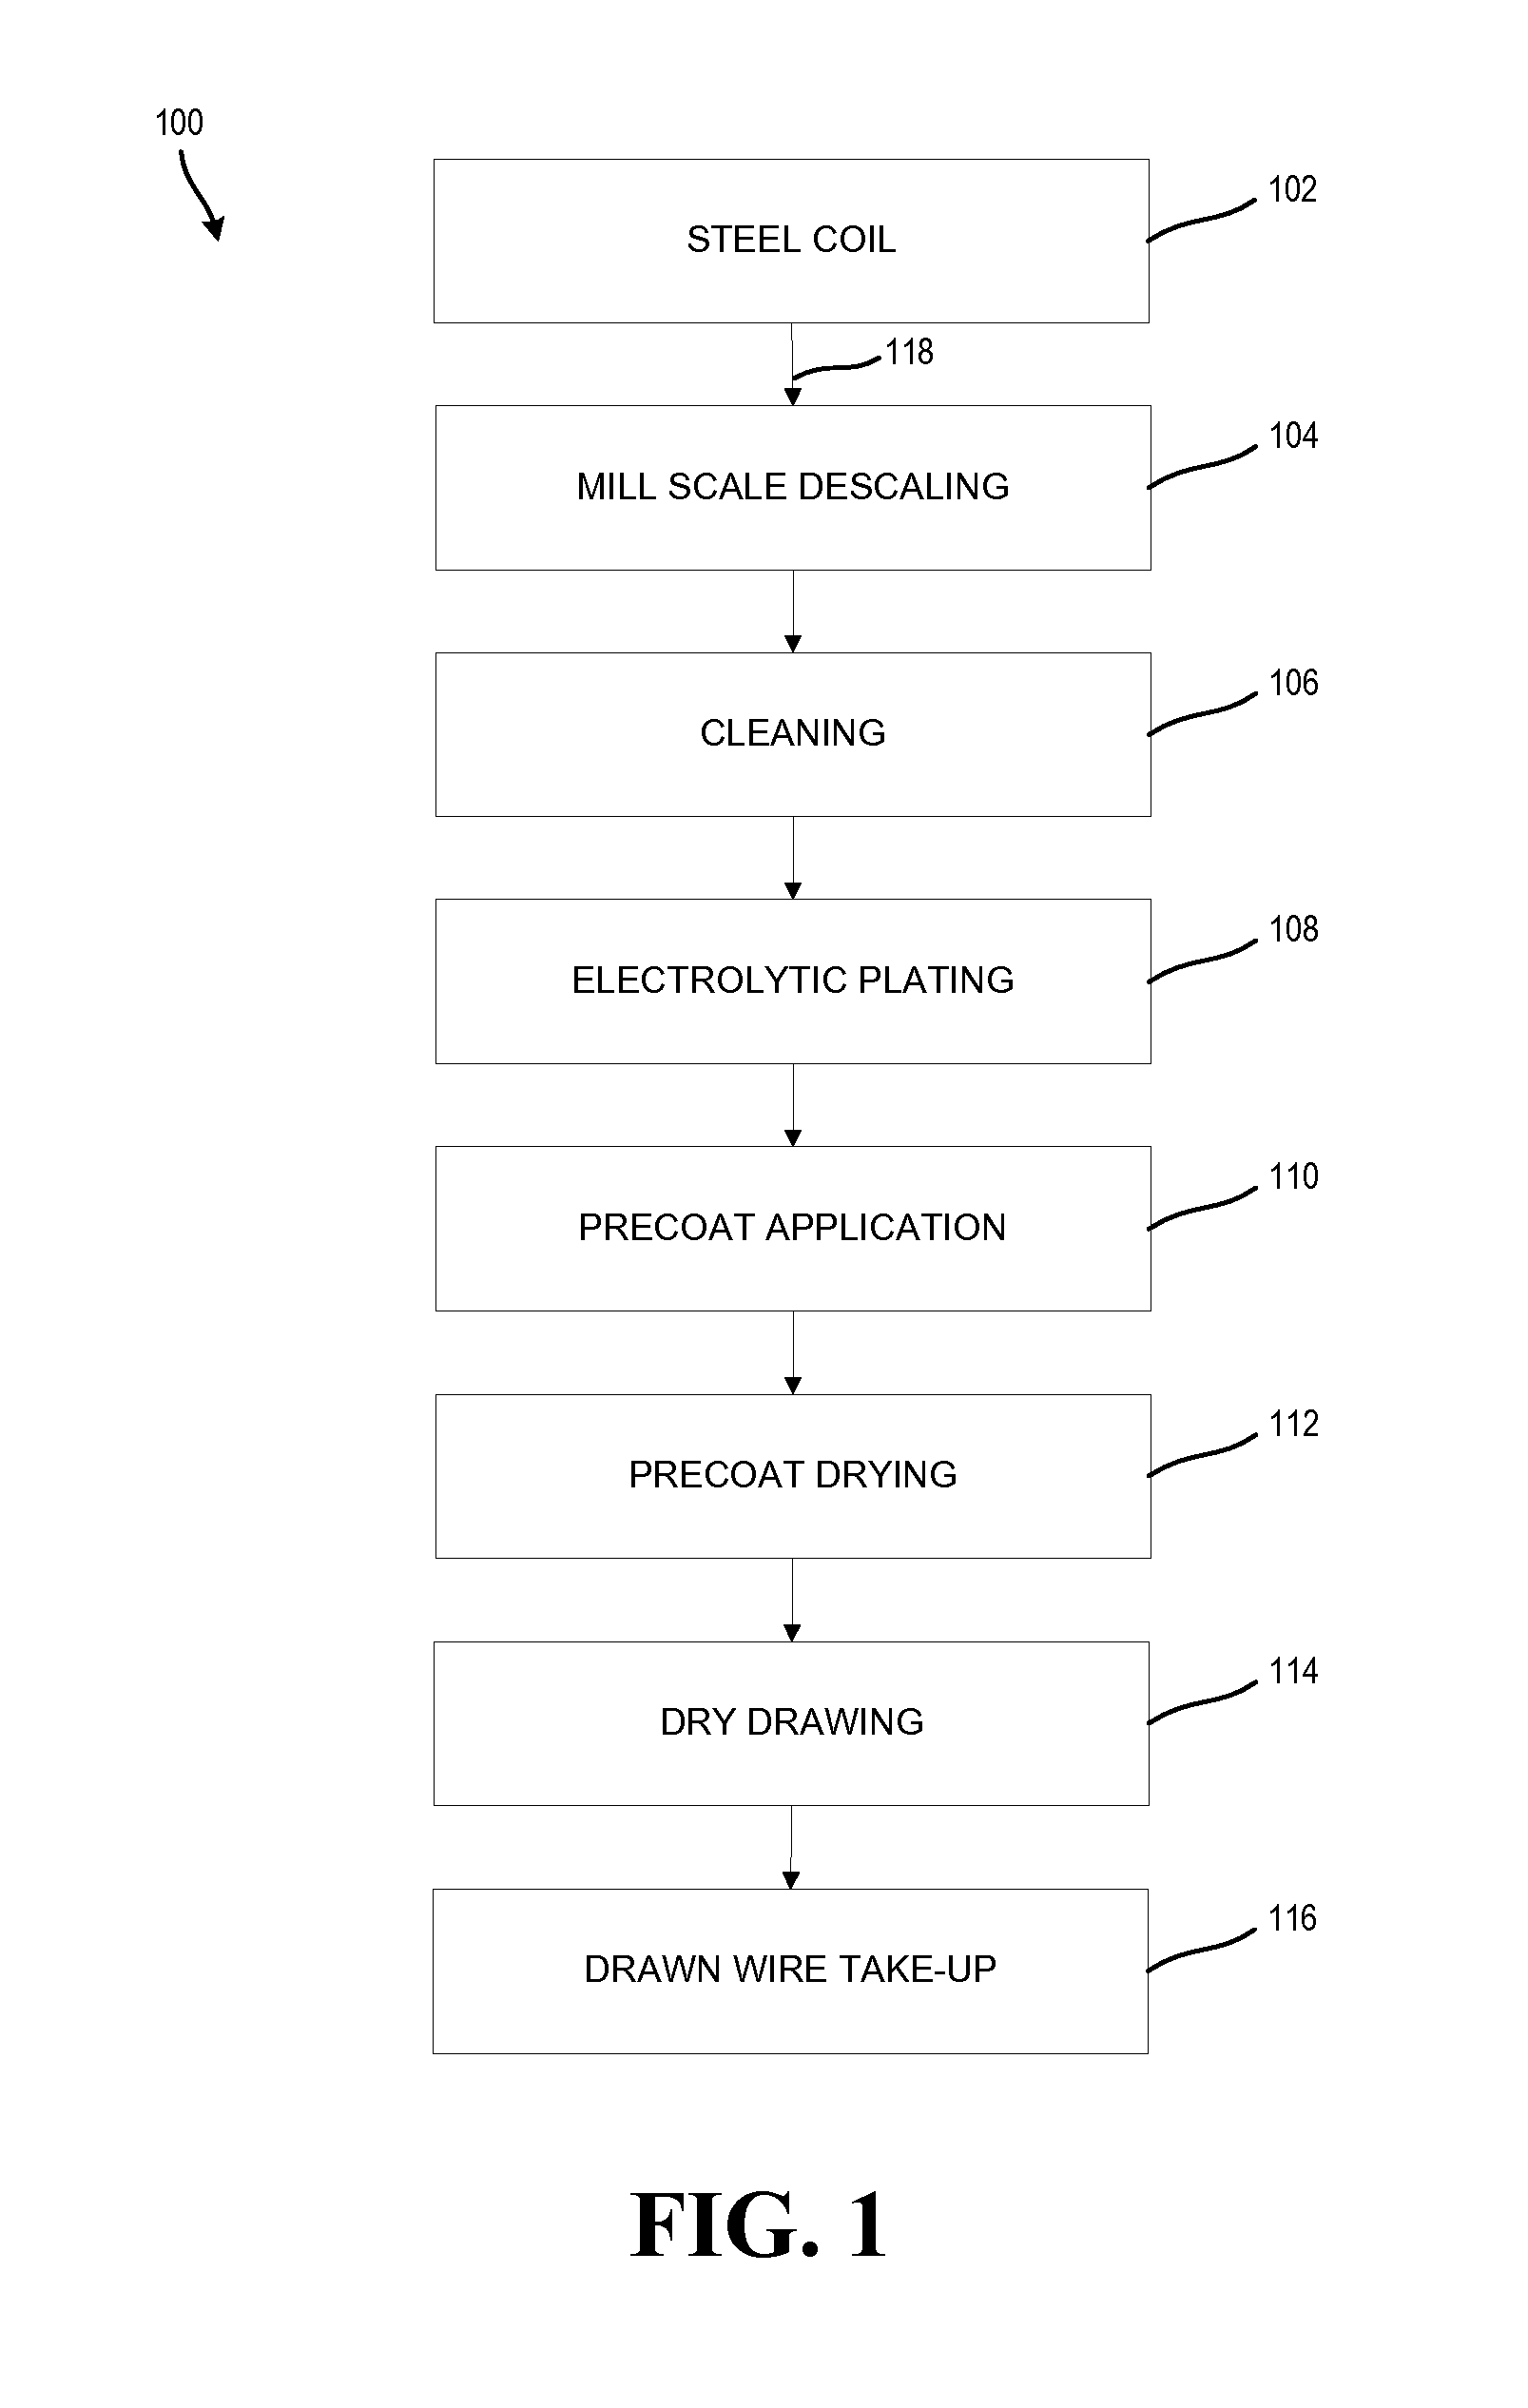 Methods and Systems for Preventing Iron Oxide Formulation and Decarburization During Steel Tempering